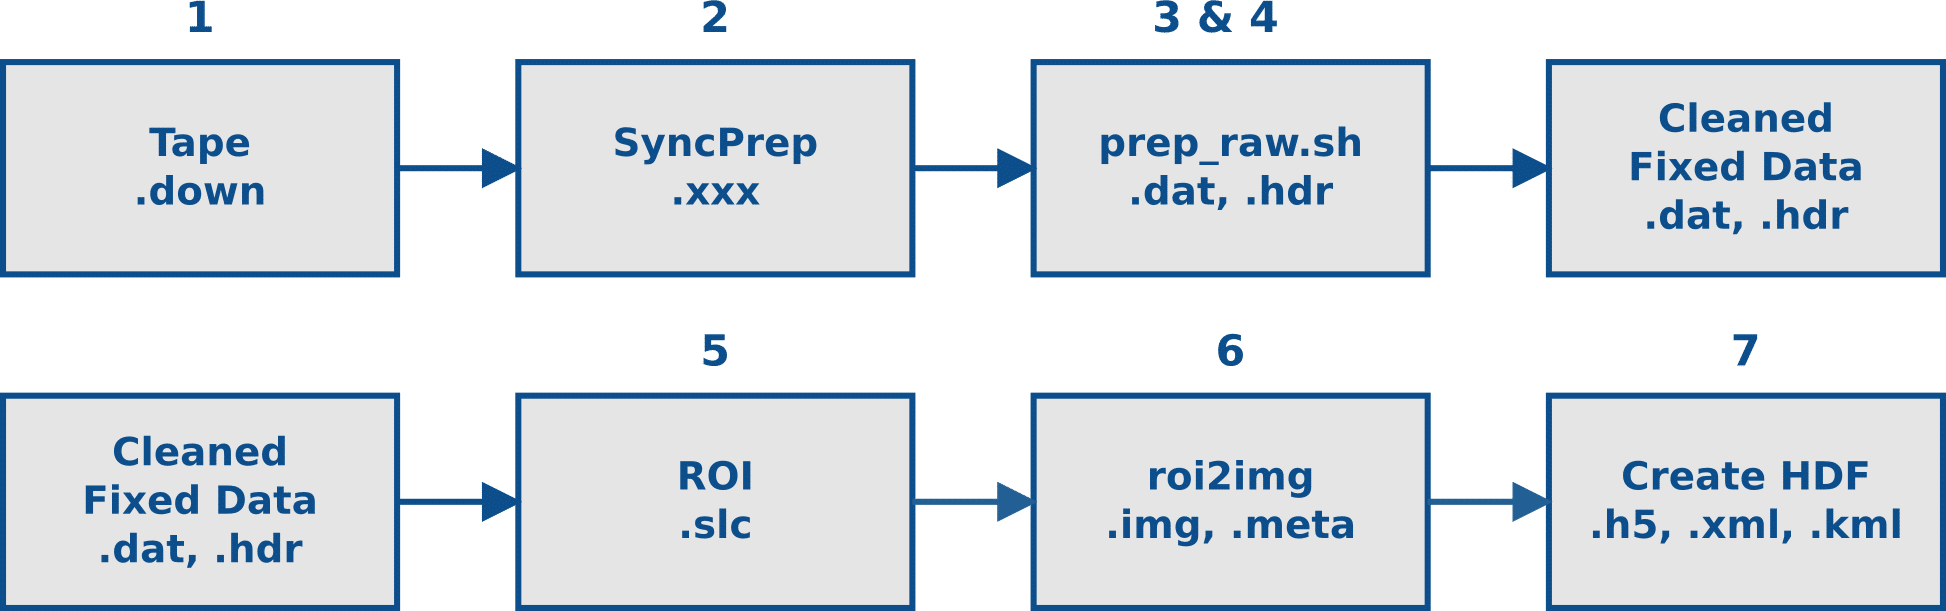 Seasat Processing Project Data Flow